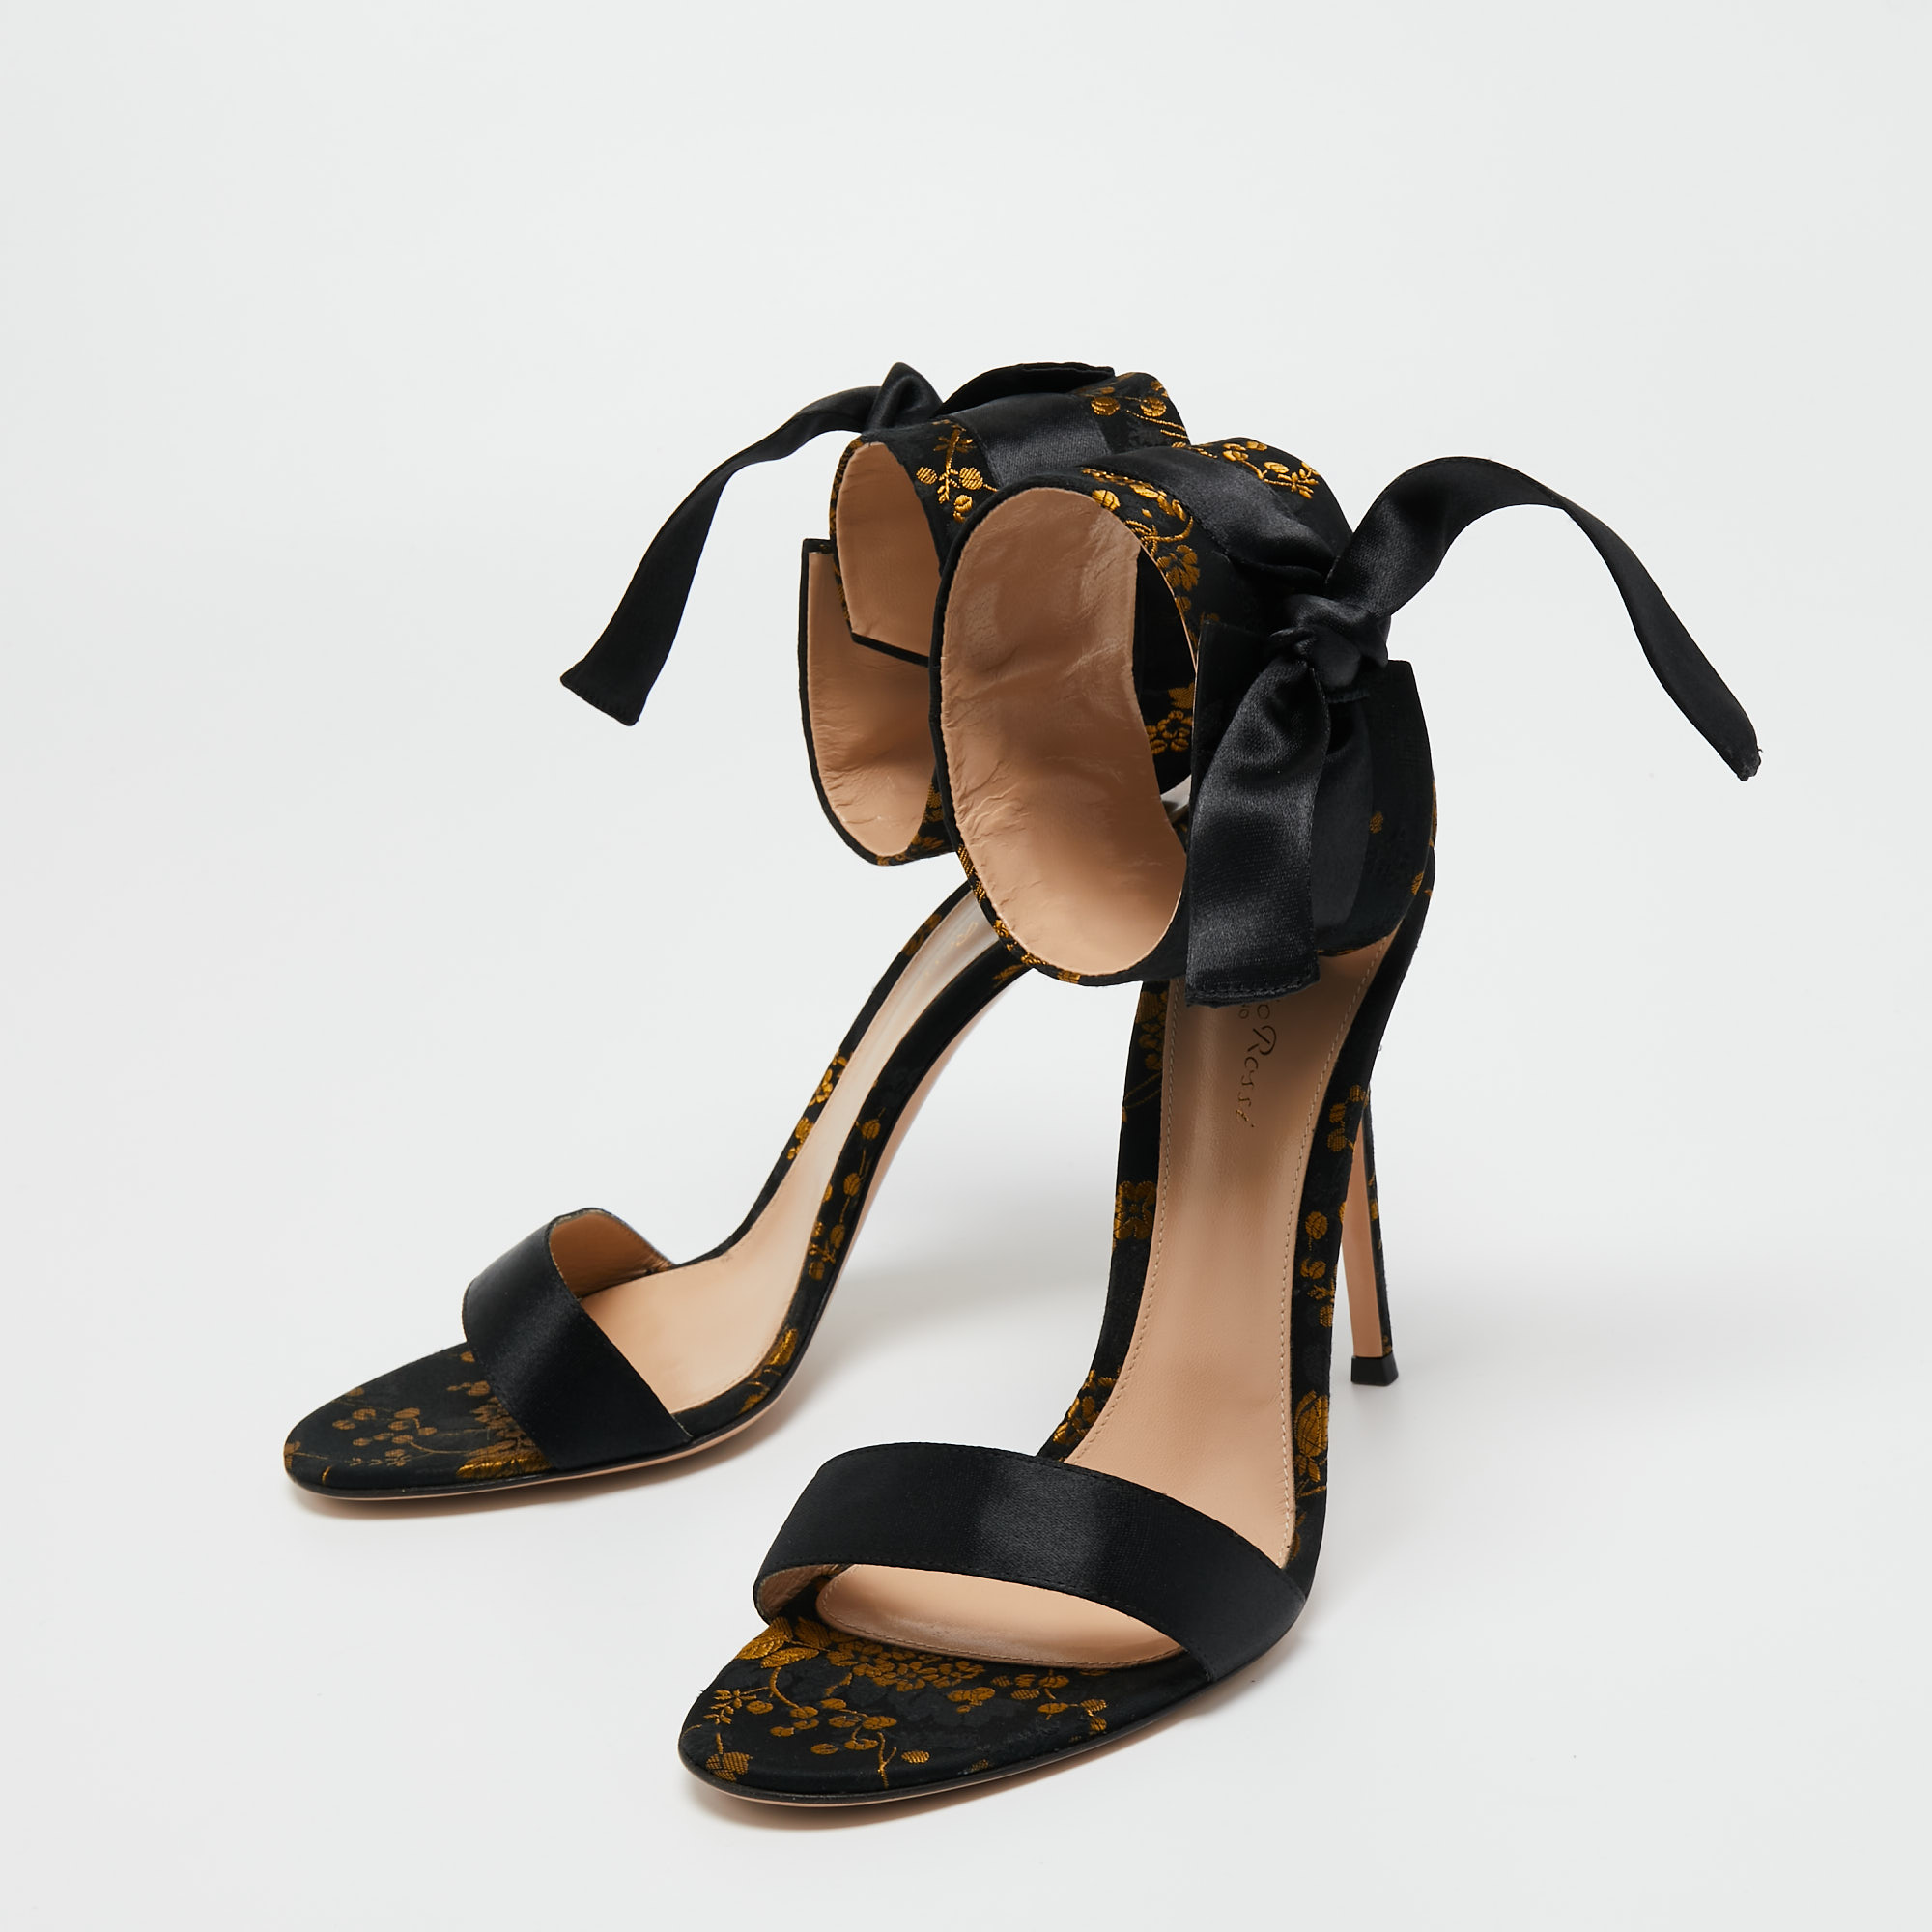 

Gianvito Rossi Black Satin and Brocade Fabric Ankle Strap Sandals Size